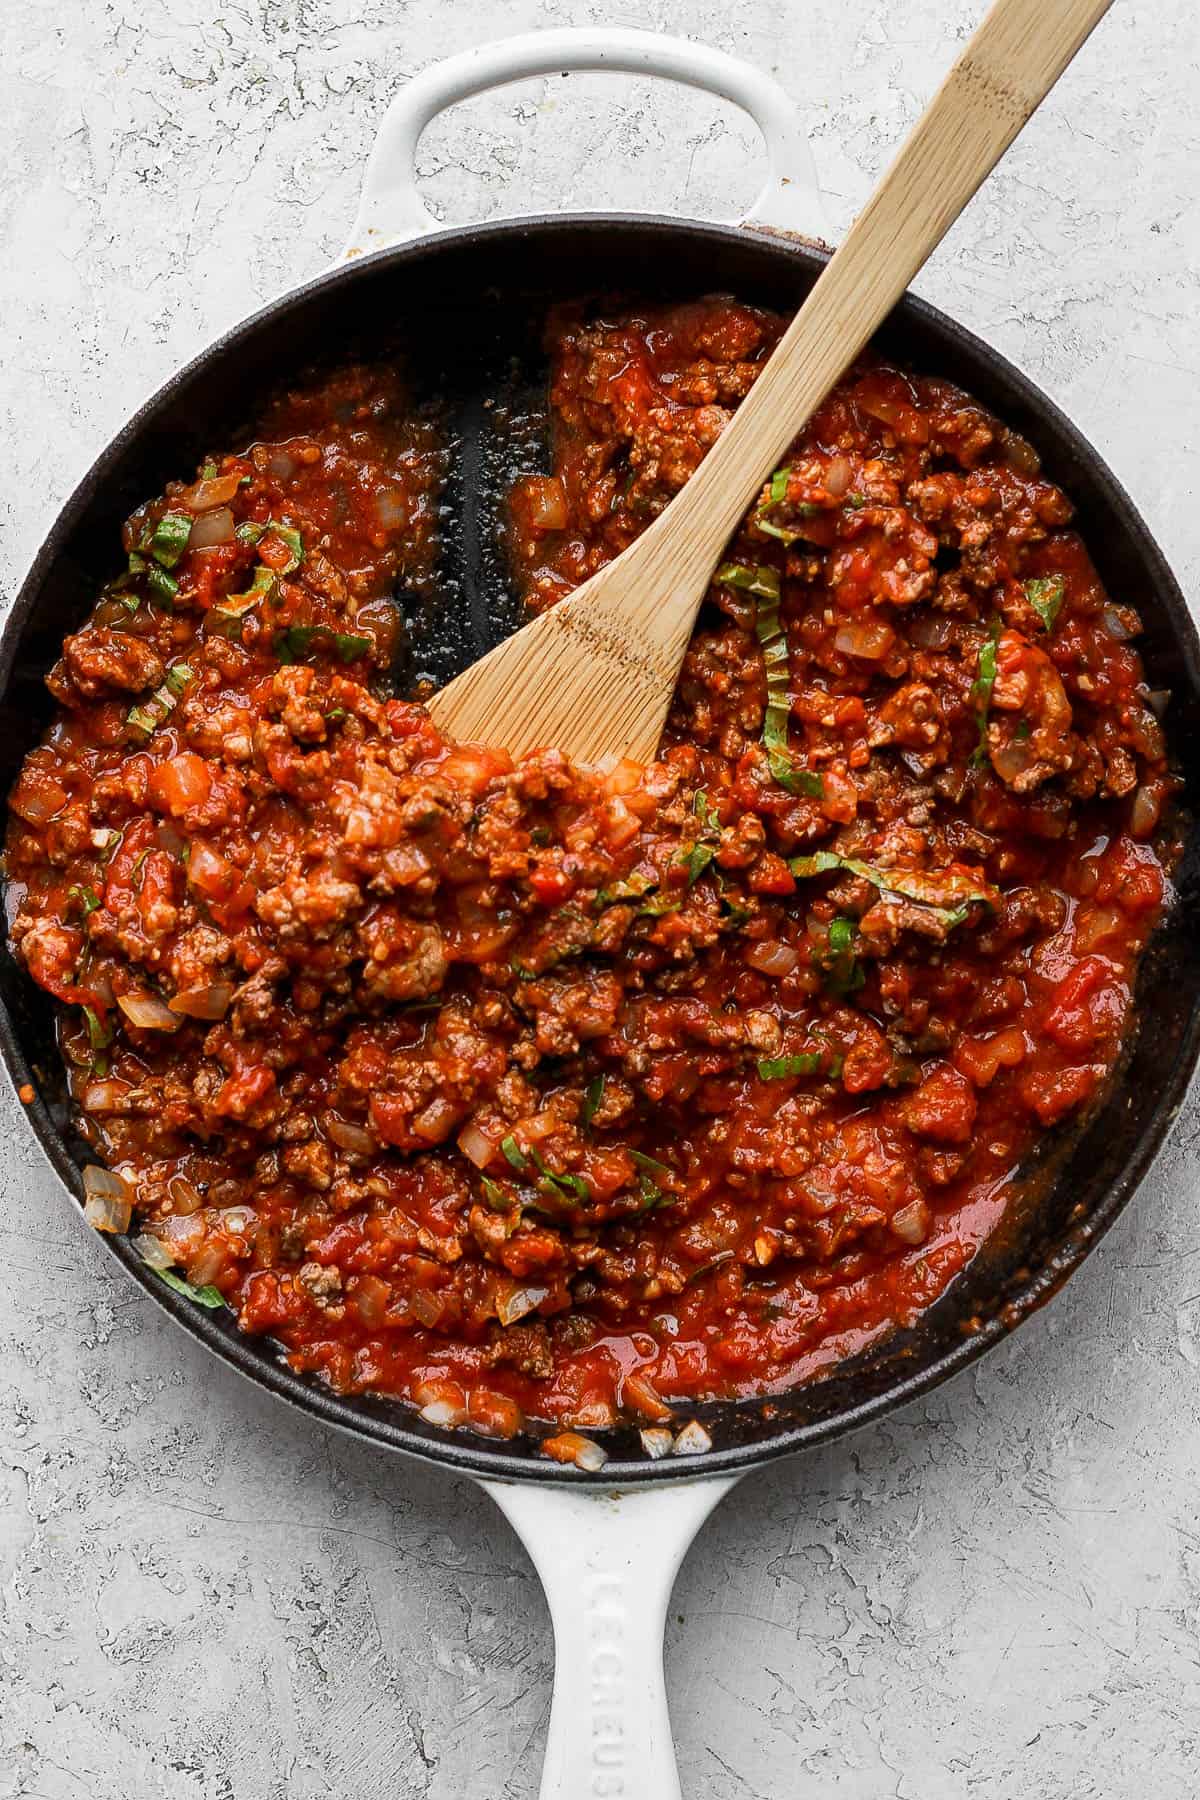 All of the meat sauce ingredients mixed together in a cast iron skillet with a wooden spoon. 